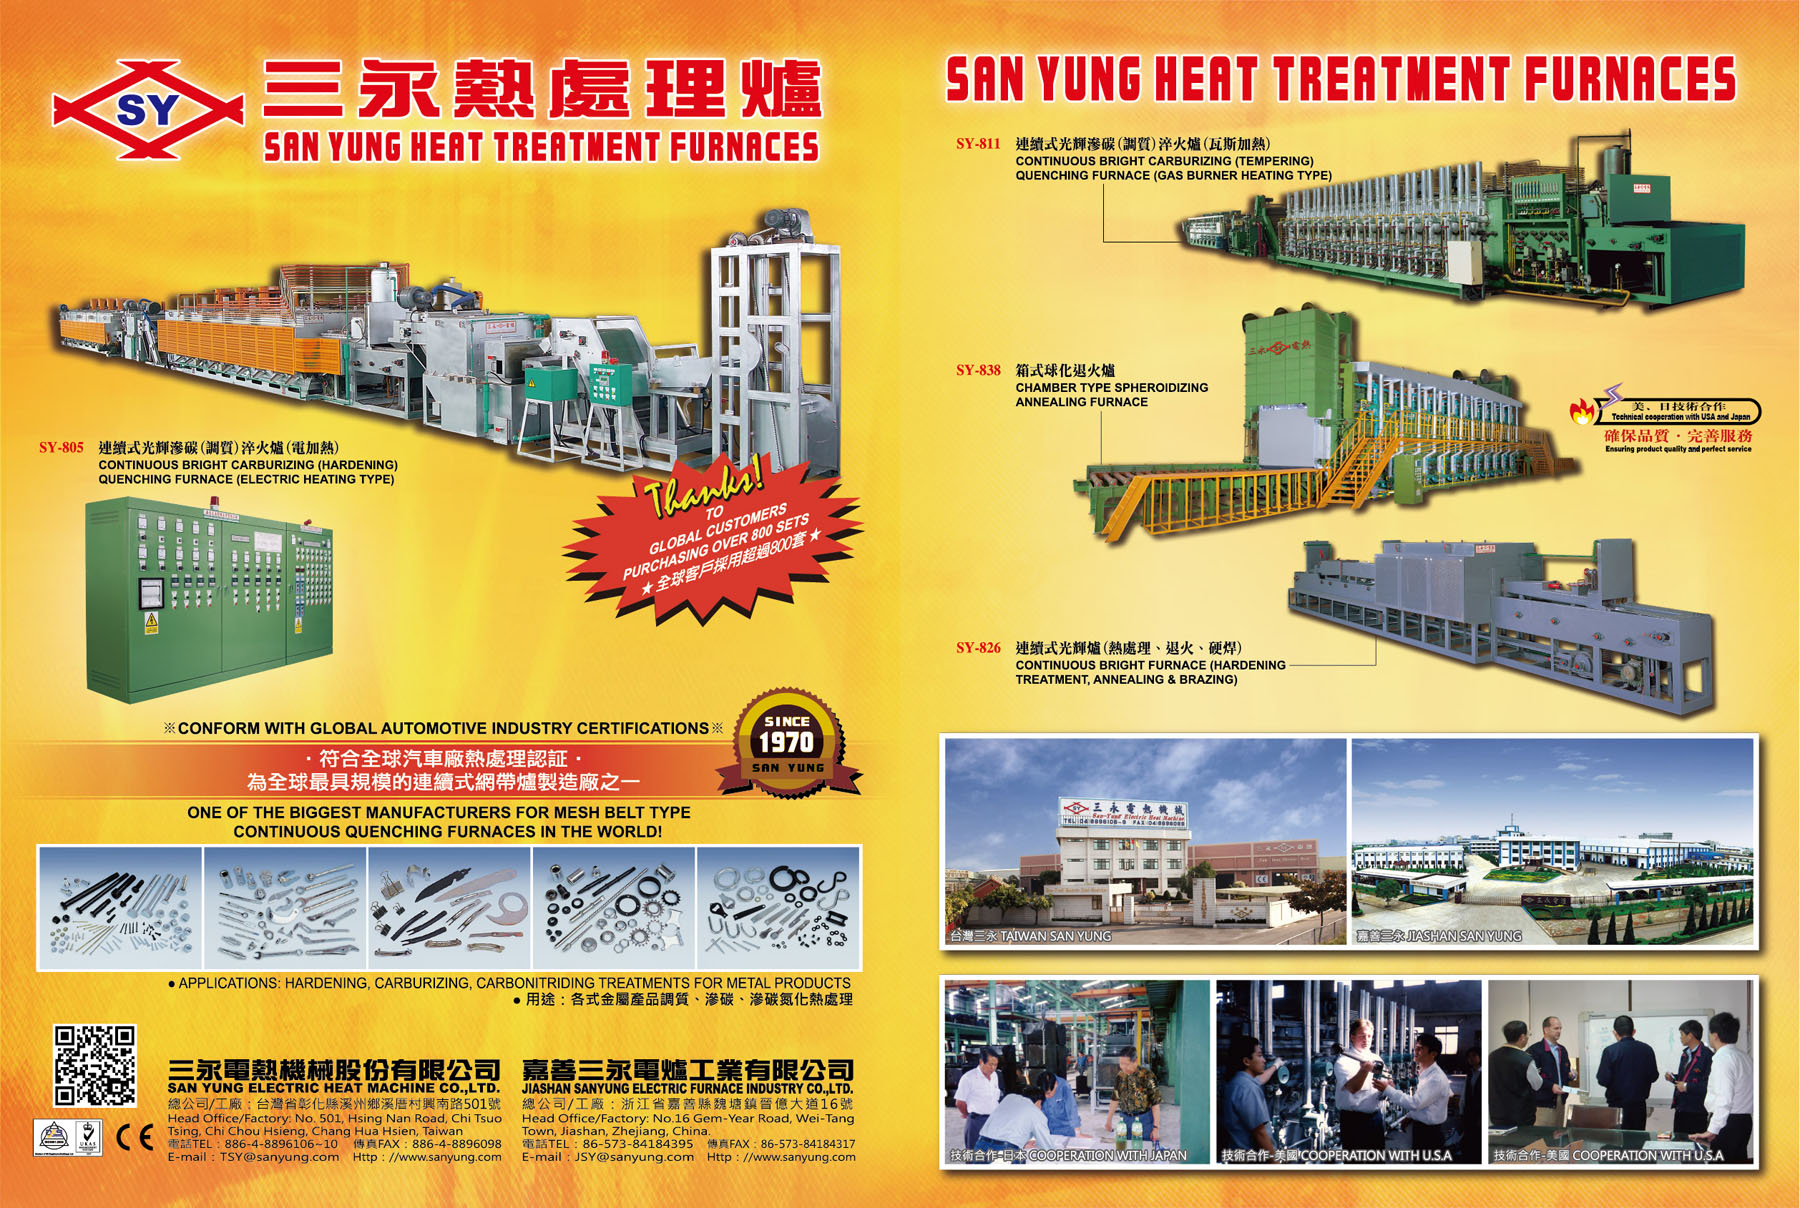 SAN YUNG ELECTRIC HEAT MACHINE CO., LTD.  , SY-805 CONTINUOUS BRIGHT CARBURIZING (HARDENING) QUENCHING FURNACE (ELECTRIC HEATING TYPE), SY-811 CONTINUOUS BRIGHT CARBURIZING (TEMPERING) QUENCHING FURNACE (GAS BURNER HEATING TYPE), SY-838 CHAMBER TYPE SPHEROIDIZING ANNEALING FURNACE, SY-826 CONTINUOUS BRIGHT FURNACE (HARDENING TREATMENT, ANNEALING & BRAZING)